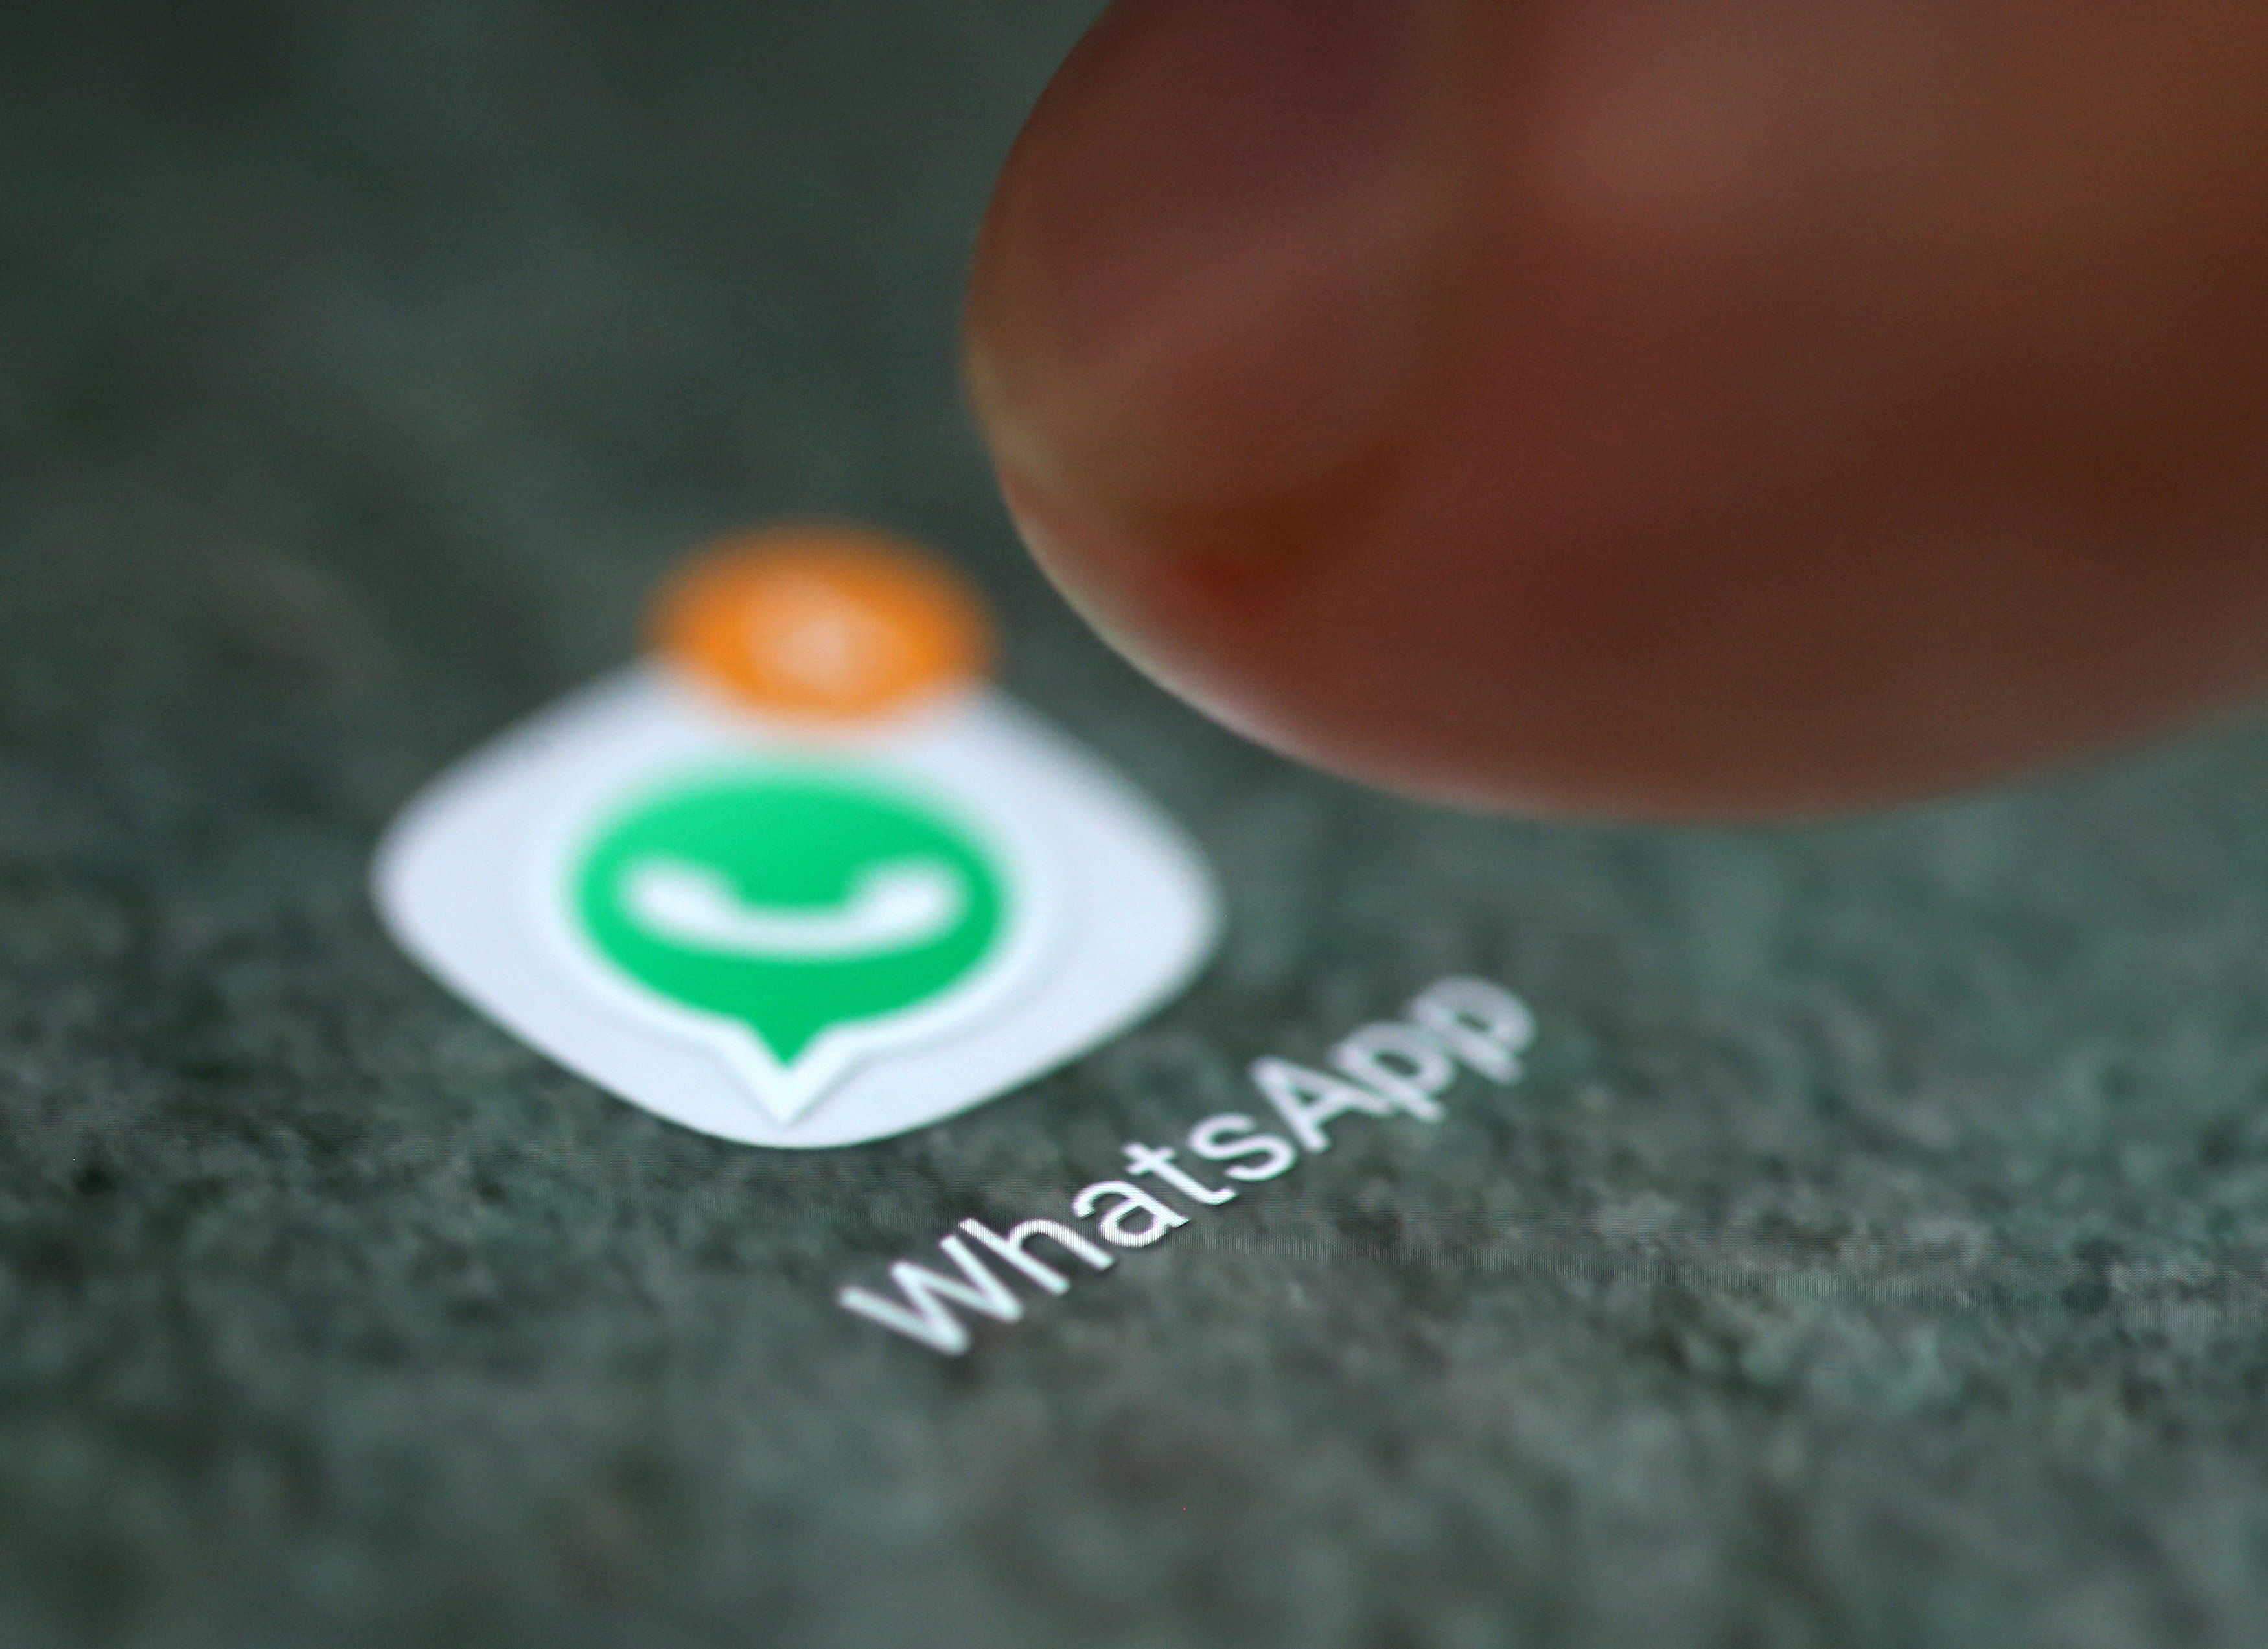 WhatsApp app on a mobile phone (Reuters File Photo)